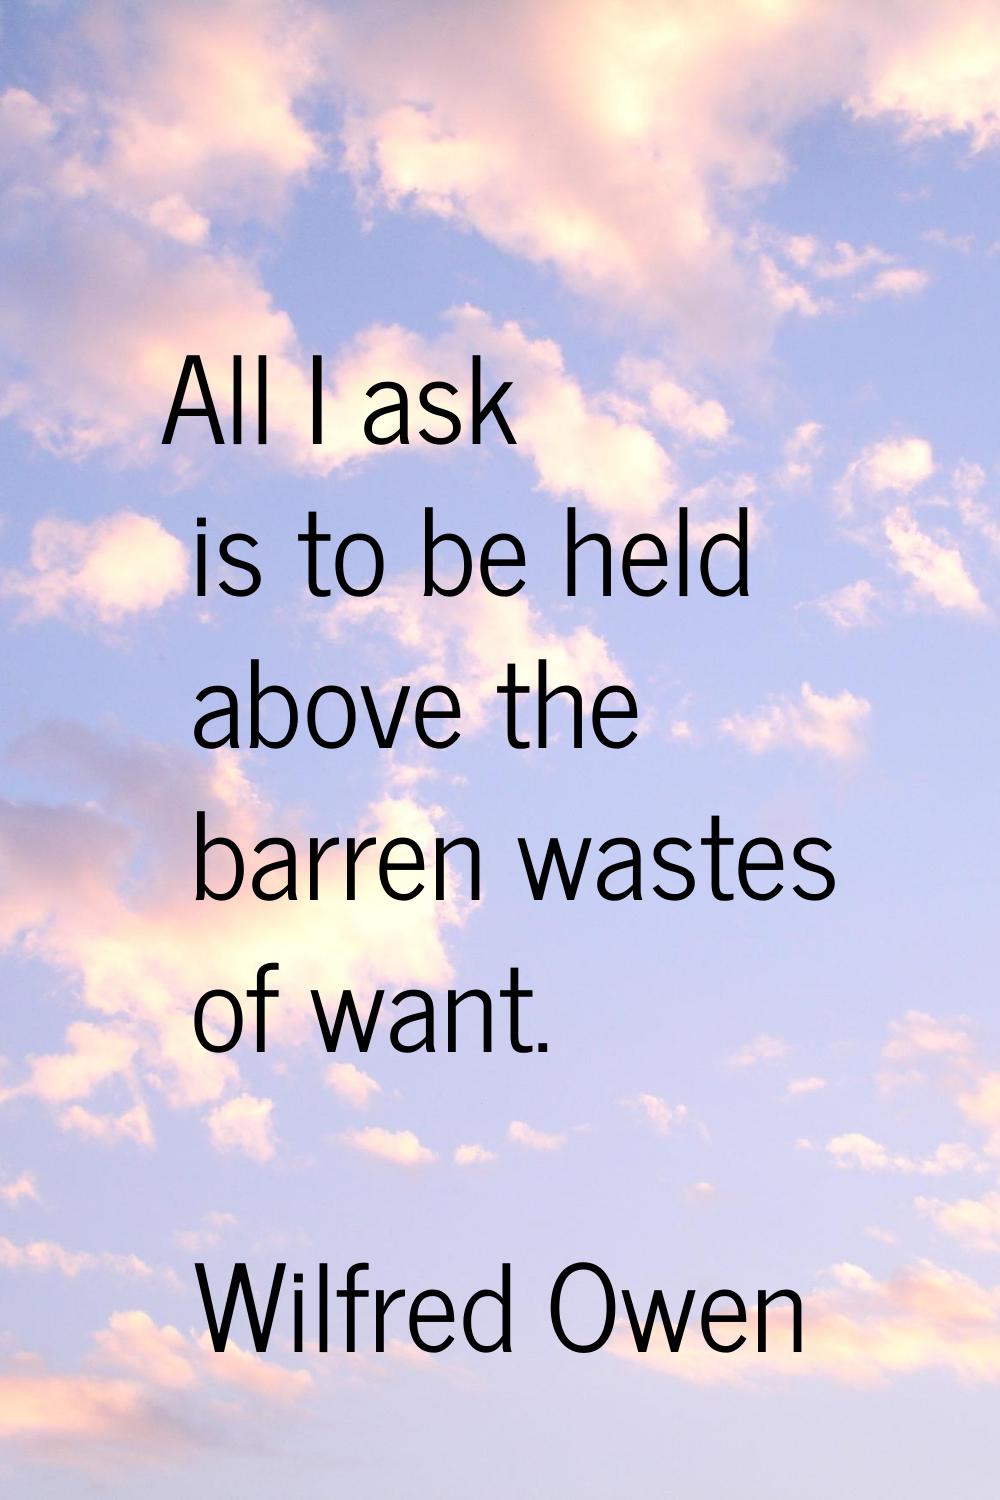 All I ask is to be held above the barren wastes of want.